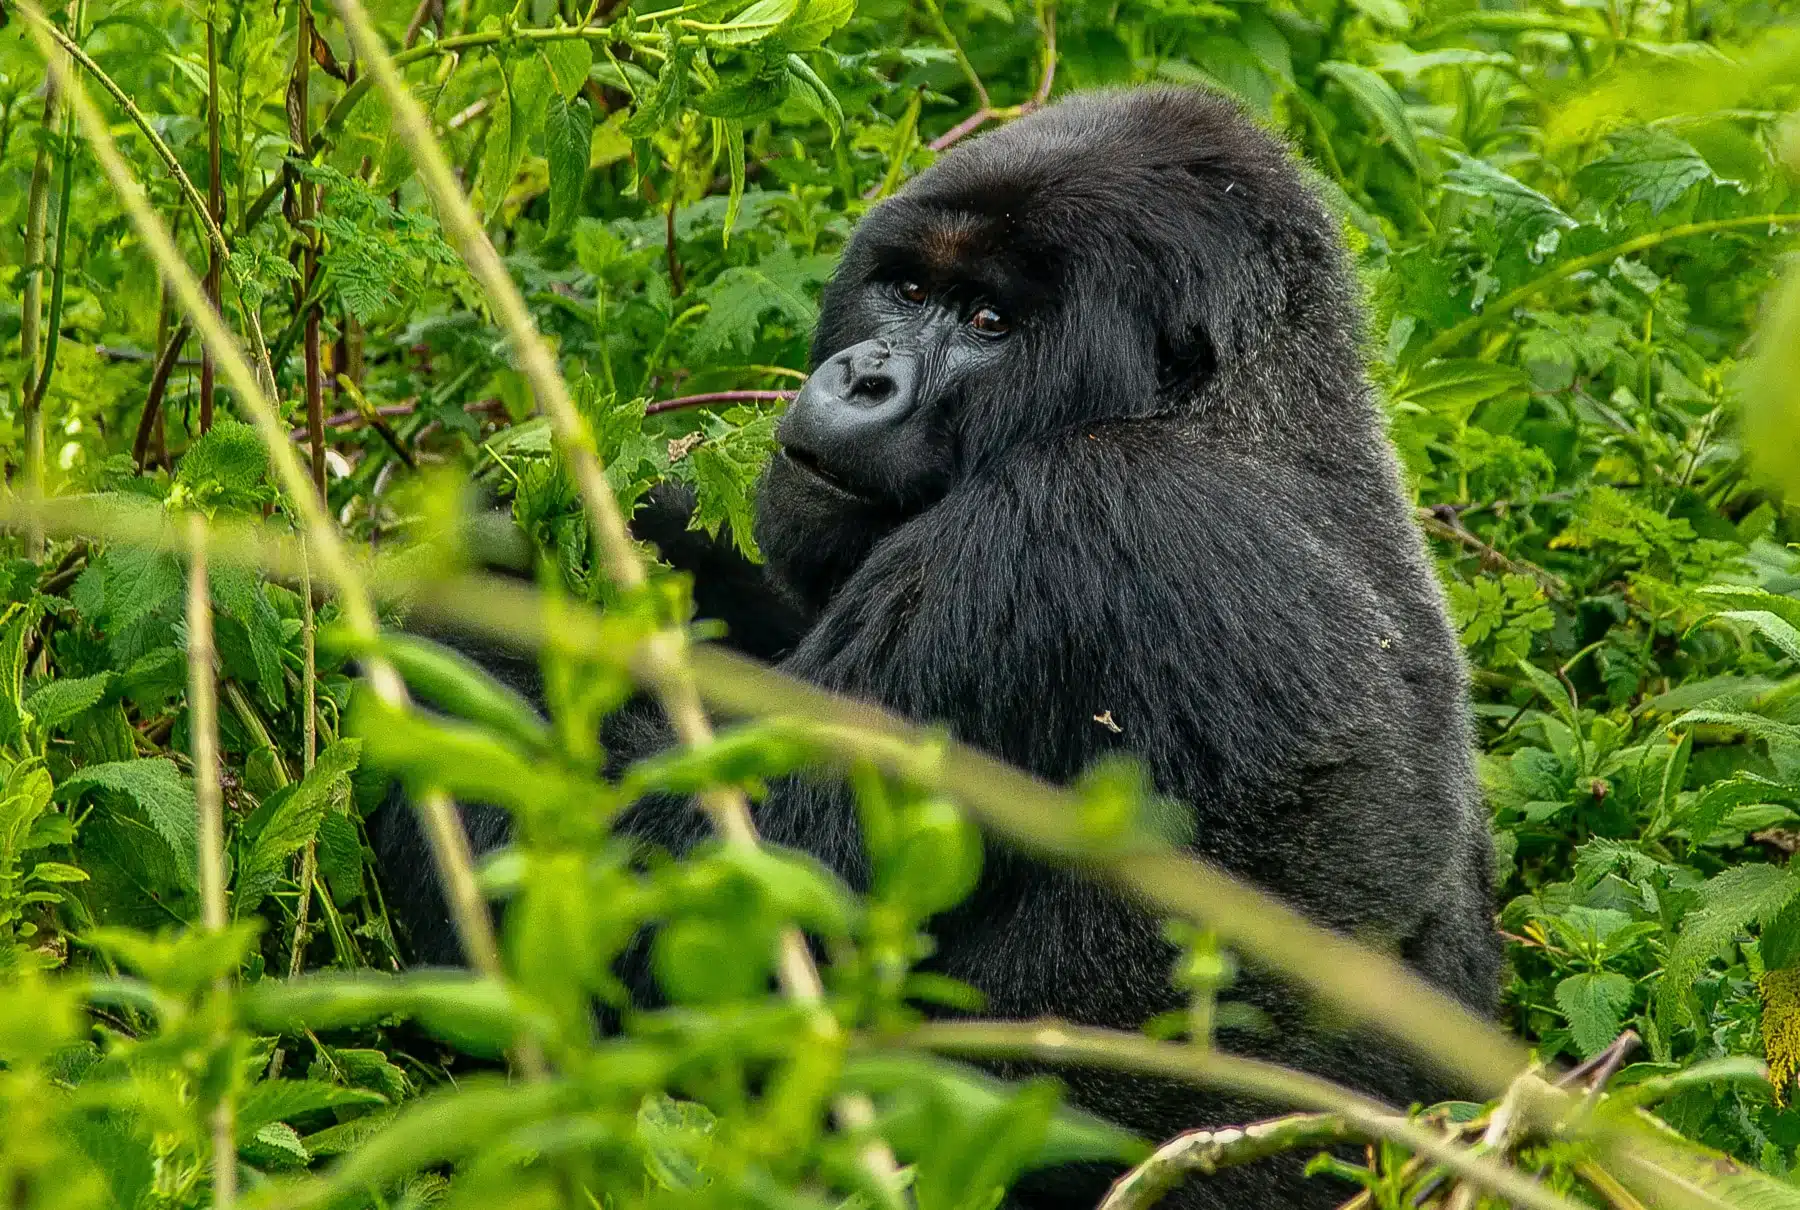 Observing endangered gorillas in Rwanda, a rare opportunity on Africa tours.